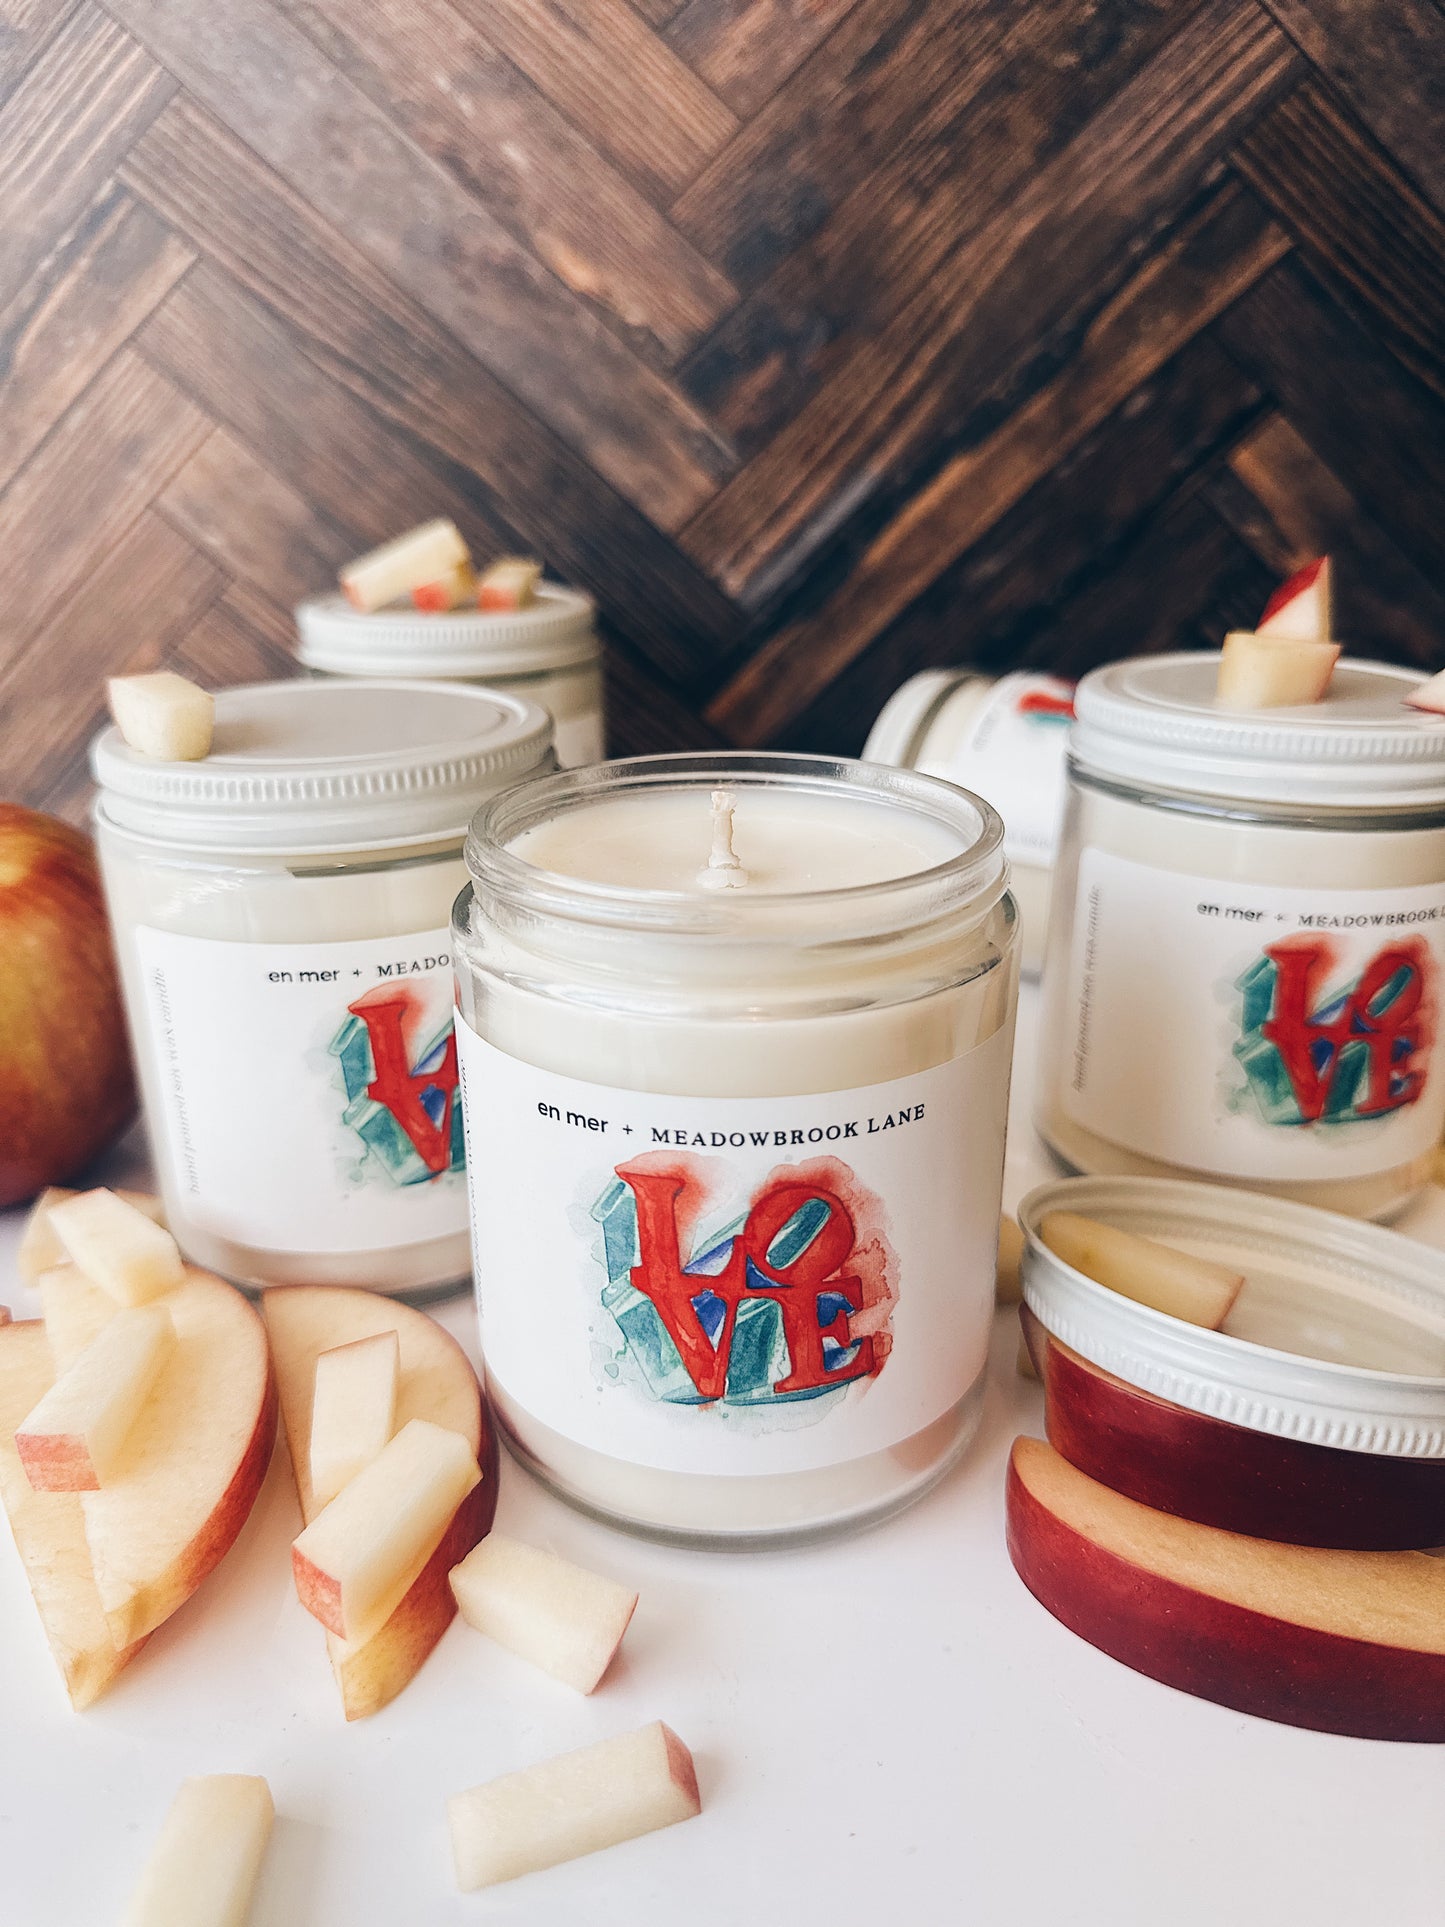 en mer + Meadowbrook Lane | LOVE, philly | soy wax candle